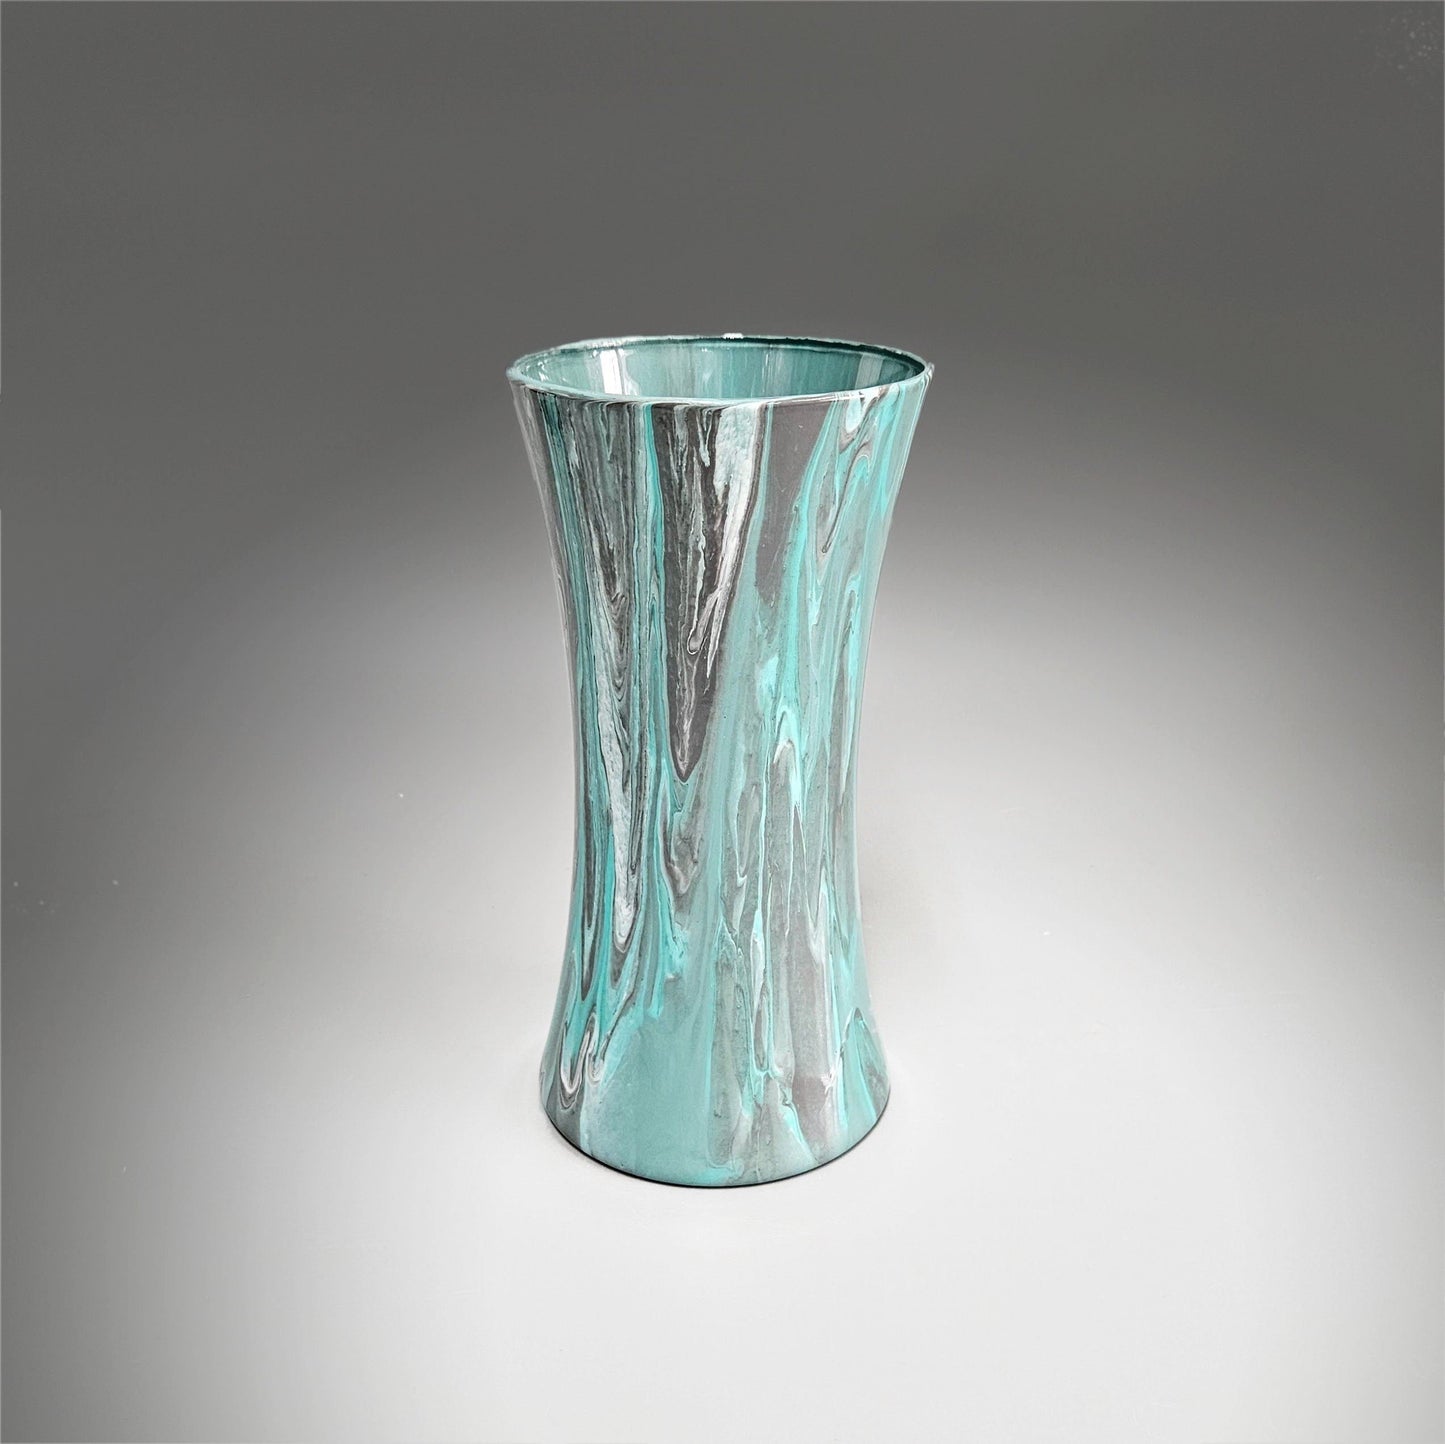 Abstract Painted Vase in Aqua and Gray, 8, 10.25 Inch